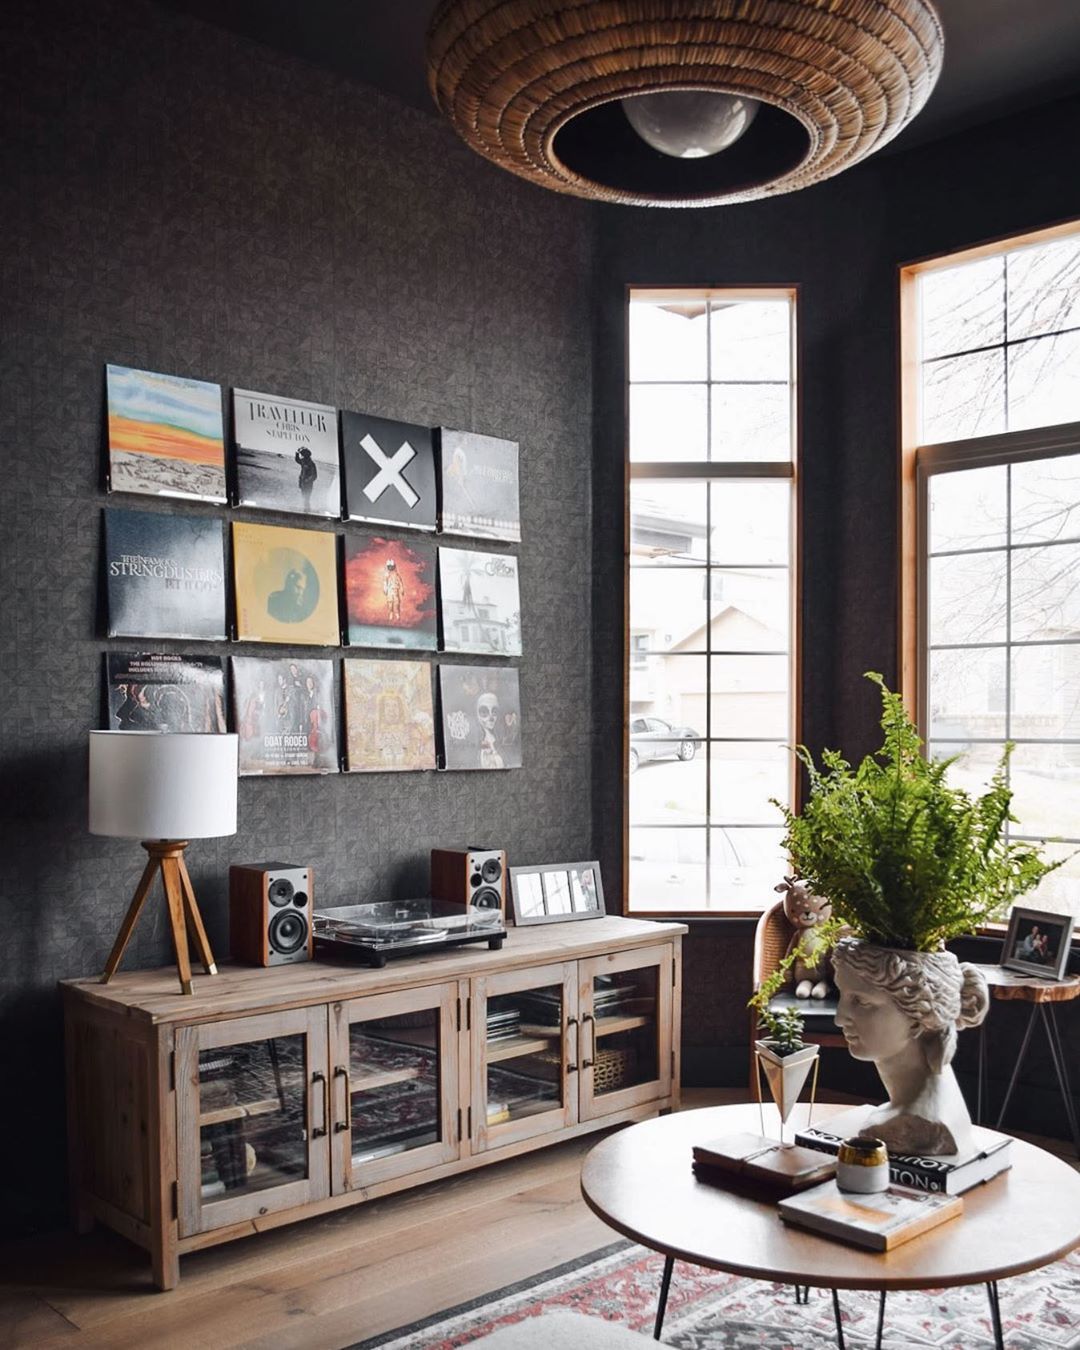 music room decorated with vinyl records on the wall photo by Instagram user @nest.out.west